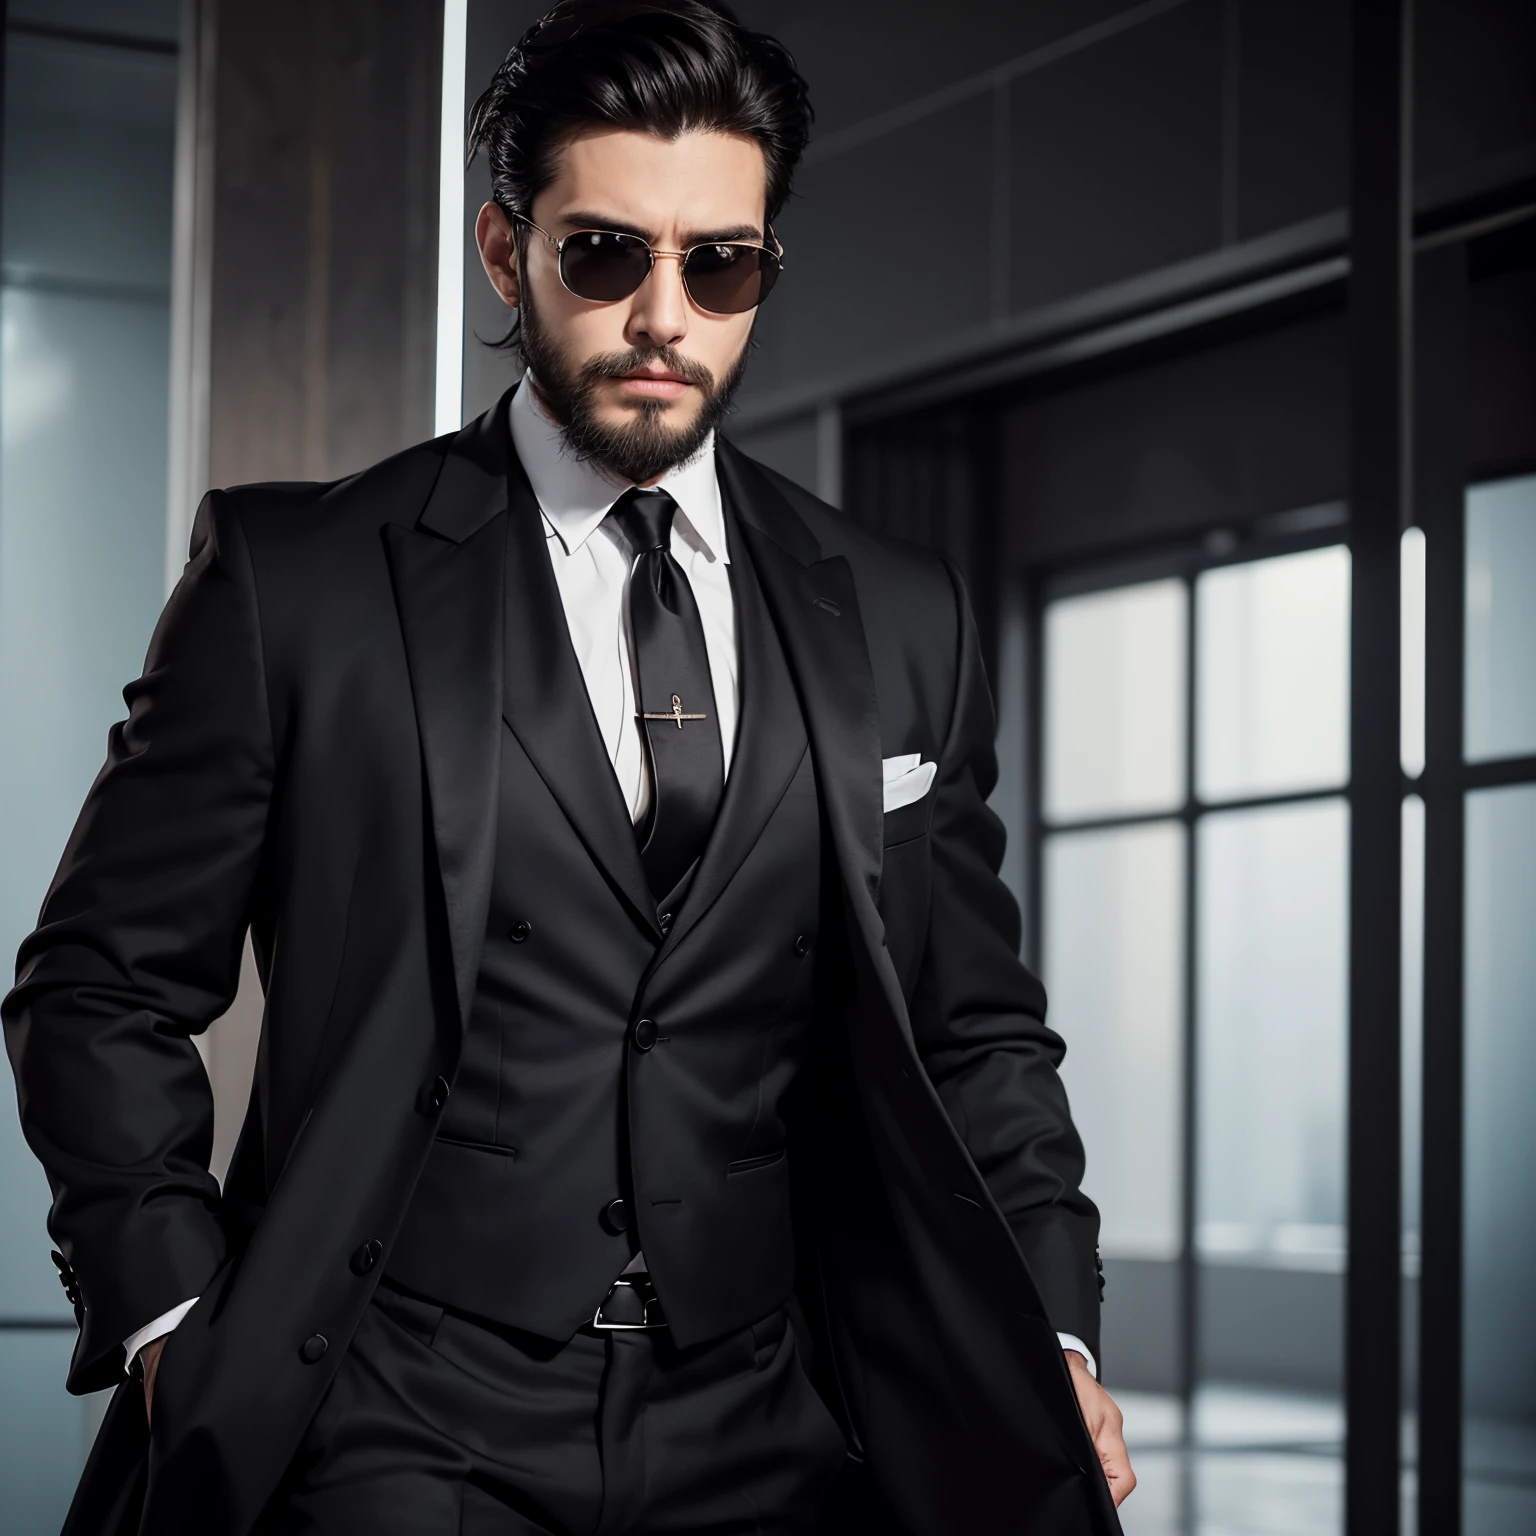 25 year old man, masculine feature, swept back black hair, muscular body, wearing 3 piece black suit with long coat jacket, long red tie, wearing expensive aviator glasses, stubble beard, facing towards the camera